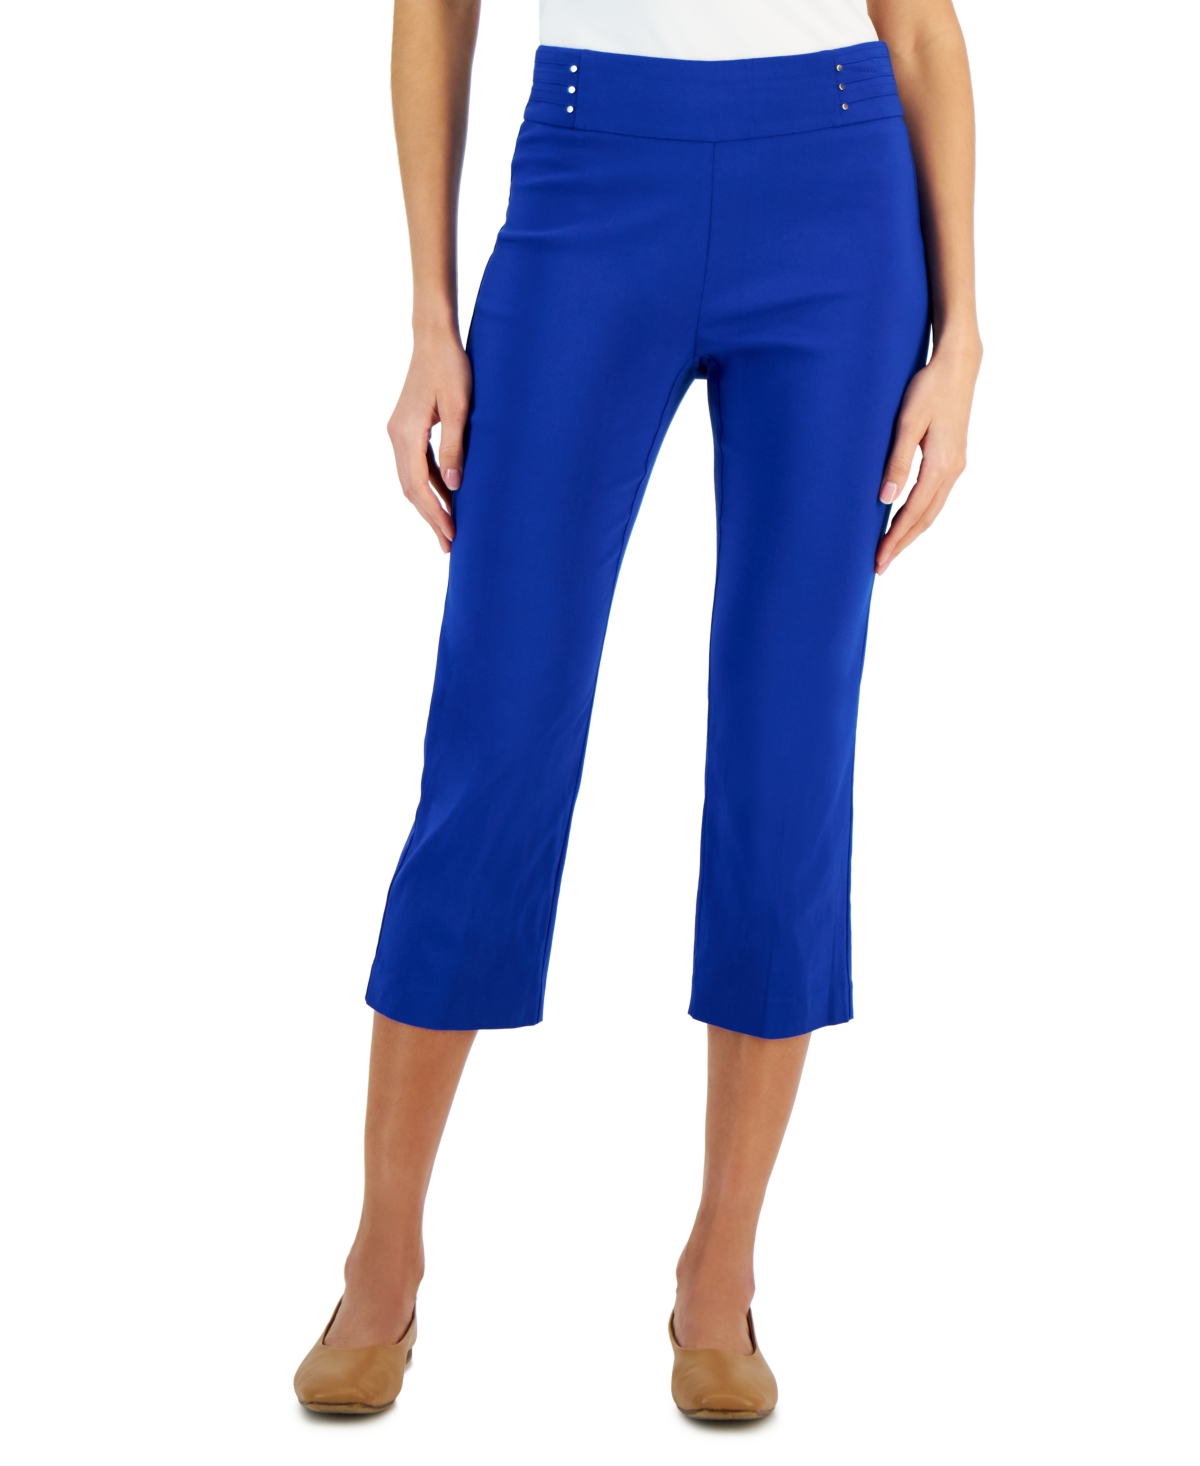 Jm Collection Women's Studded Pull-On Tummy Control Pants, Regular and  Short Lengths, Created for Macy's